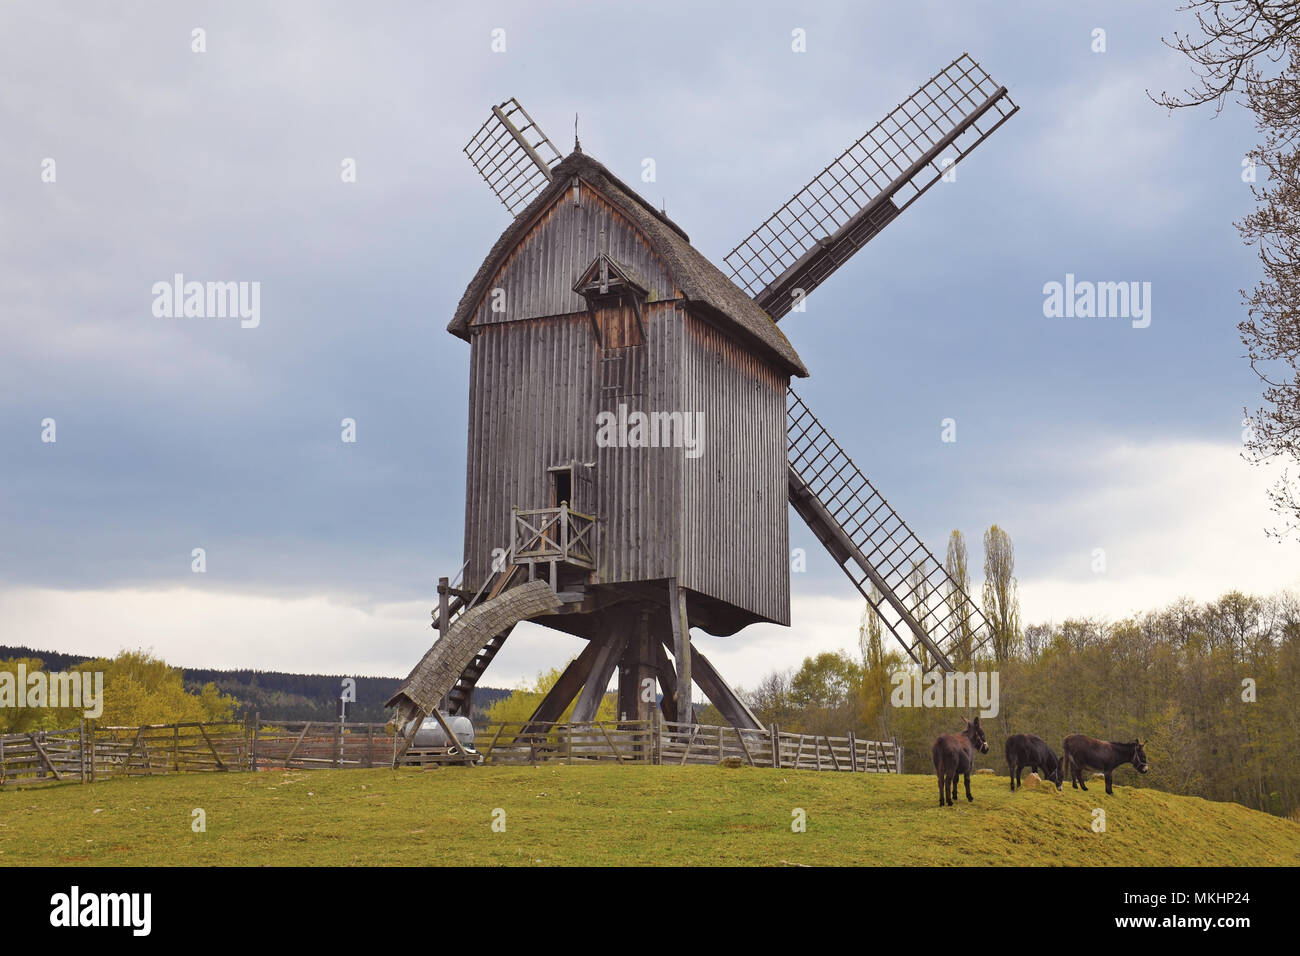 Historical windmill in the open-air museum Hessenpark, Hesse, Germany Stock Photo